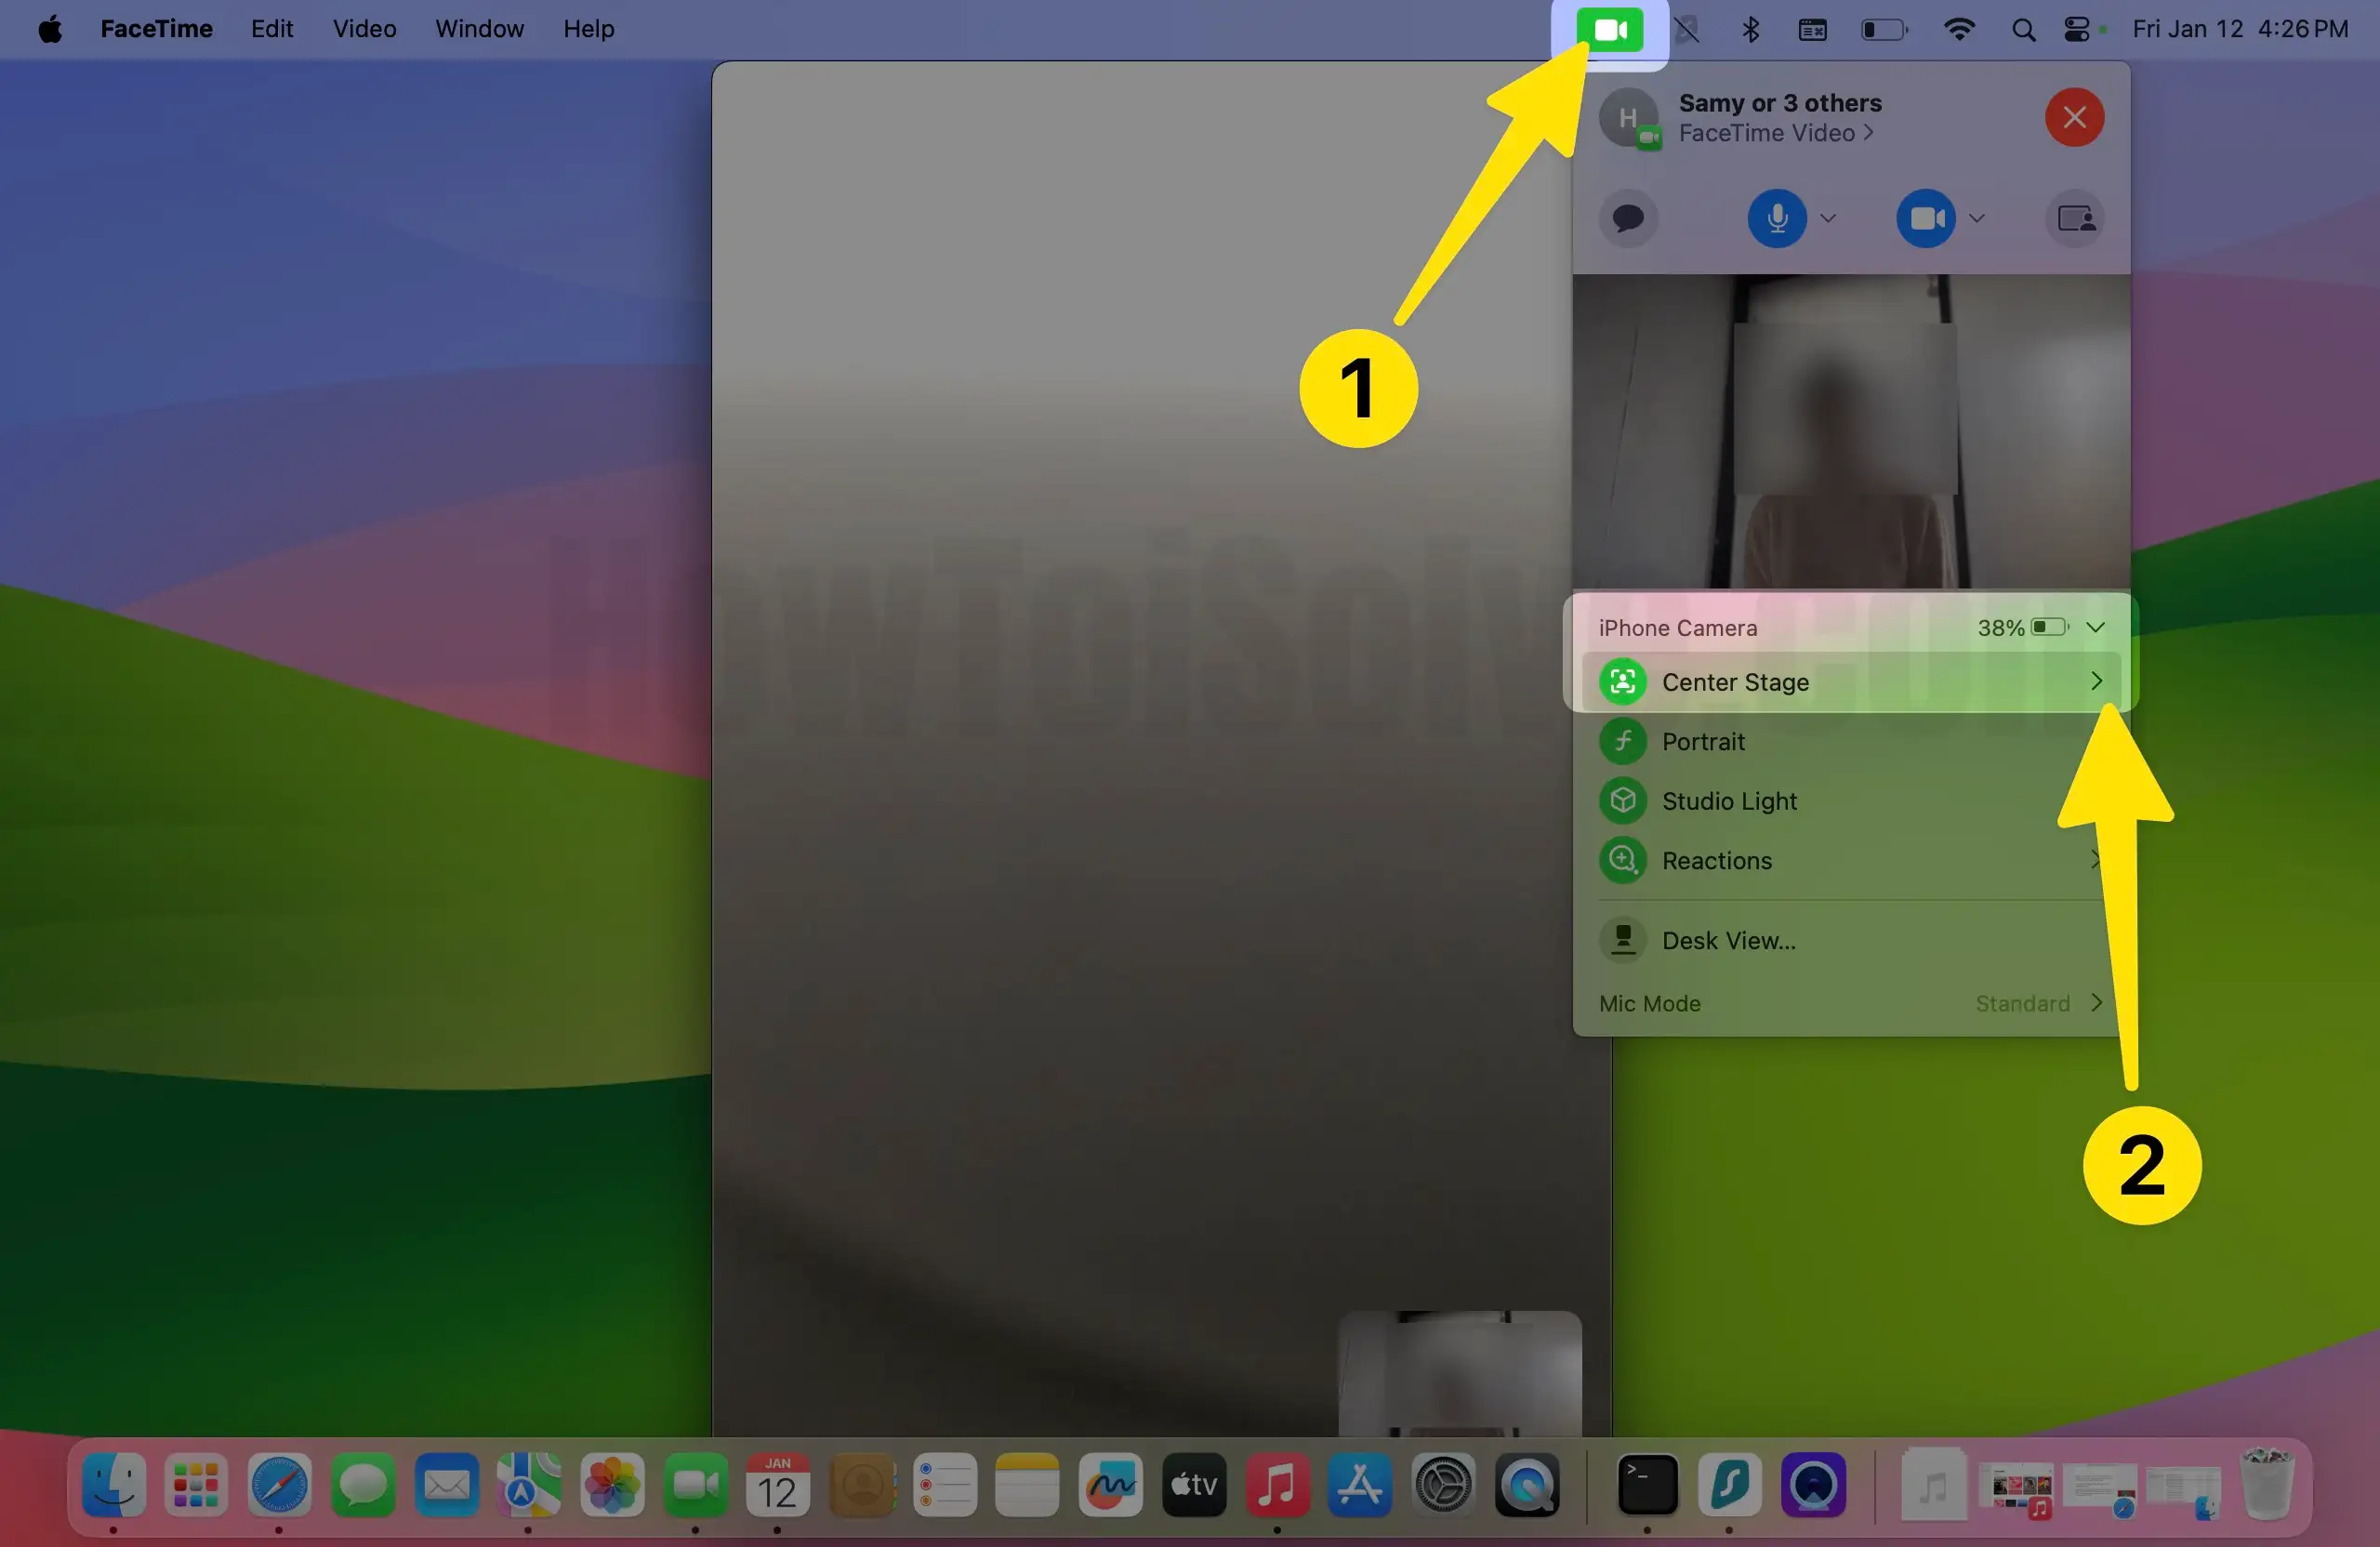 Select Facetime icon at menubar choose center stage under iPhone camera section